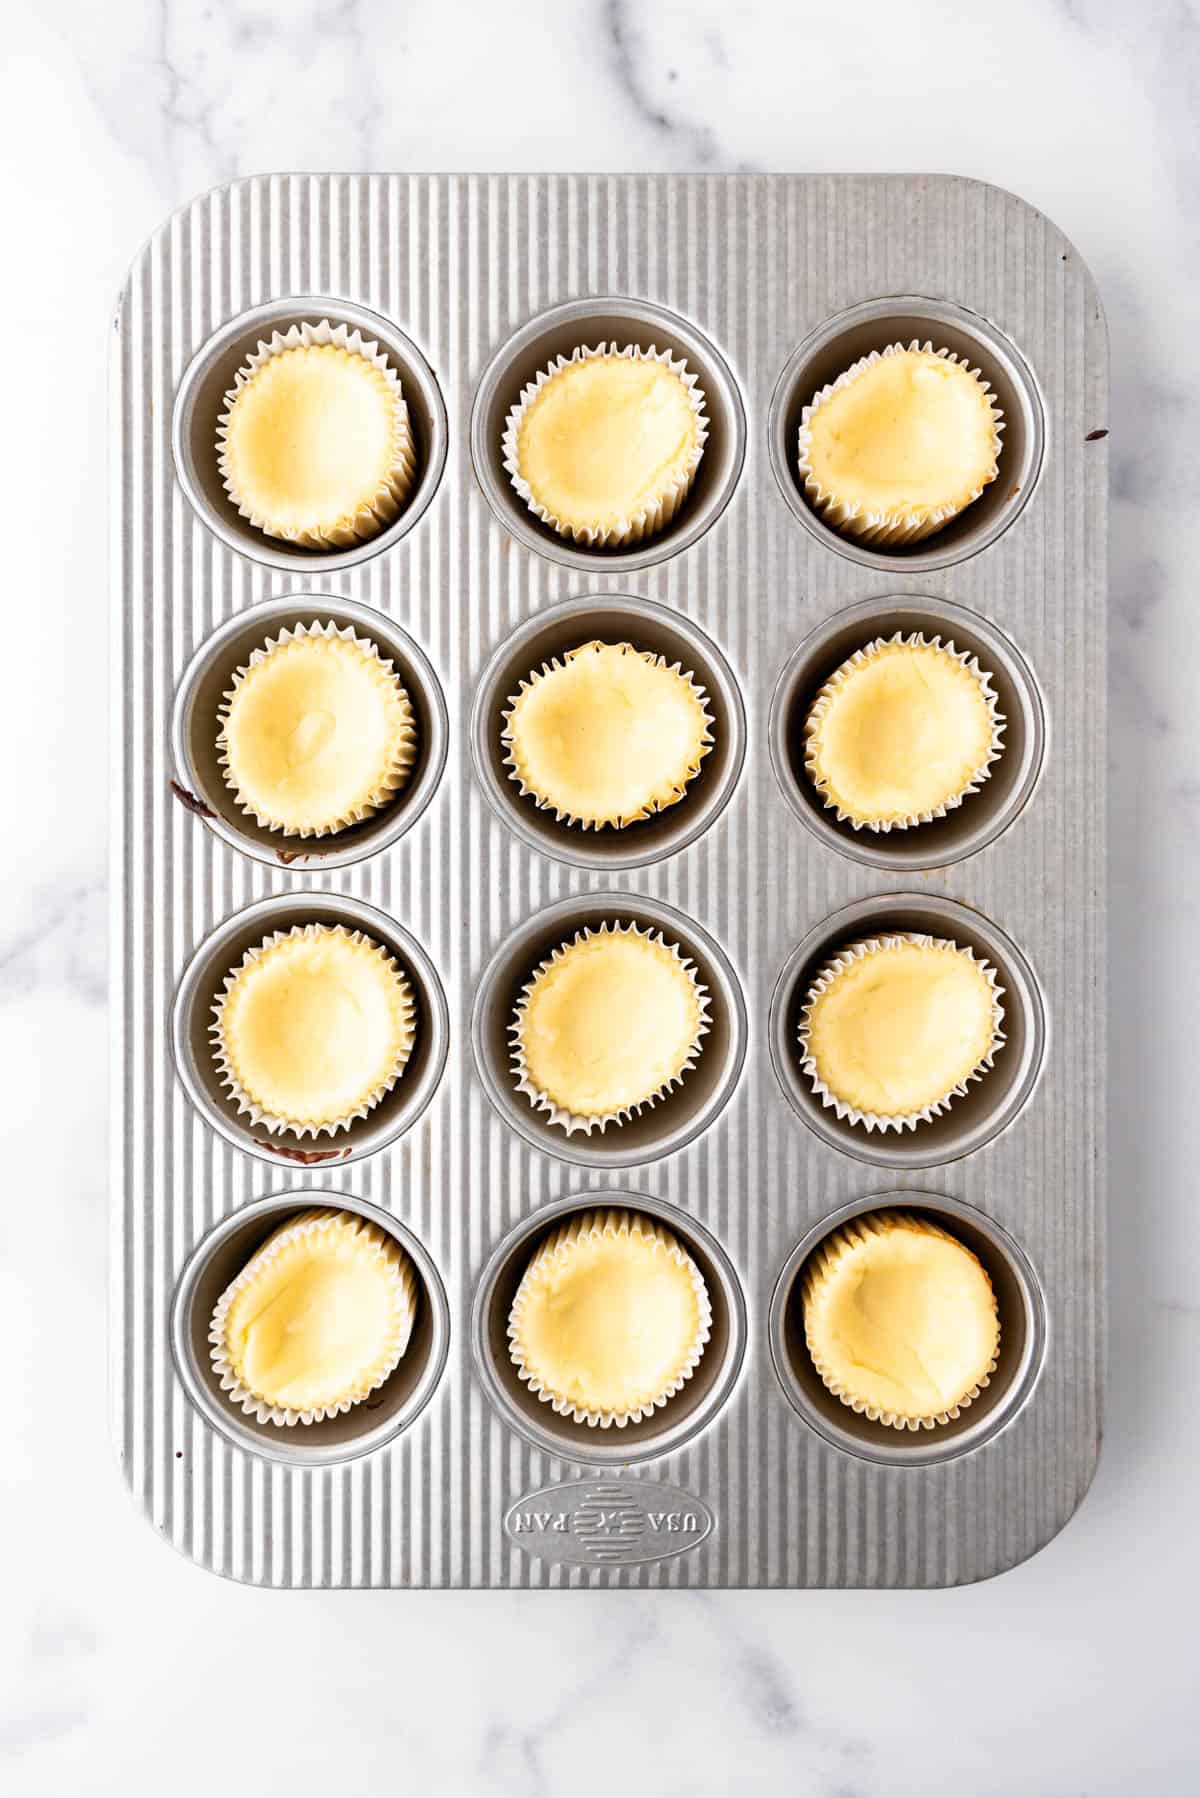 Baked cheesecake tarts in a muffin pan.